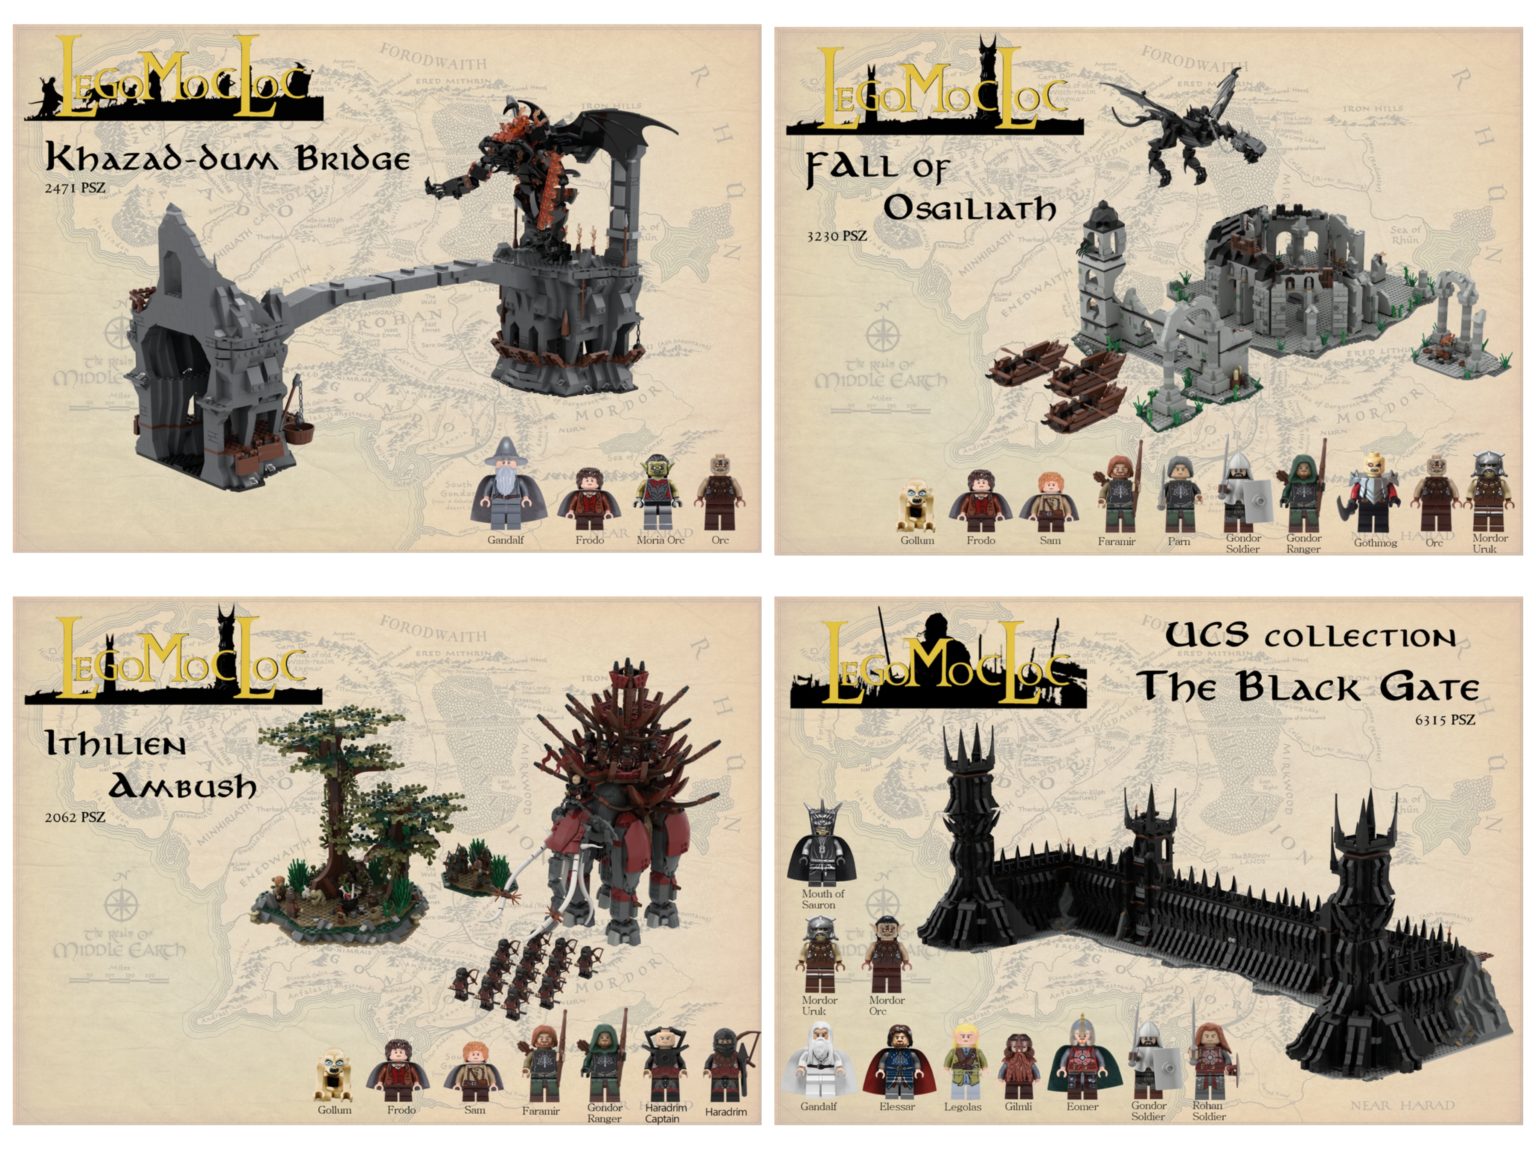 lord of the rings lego dlc